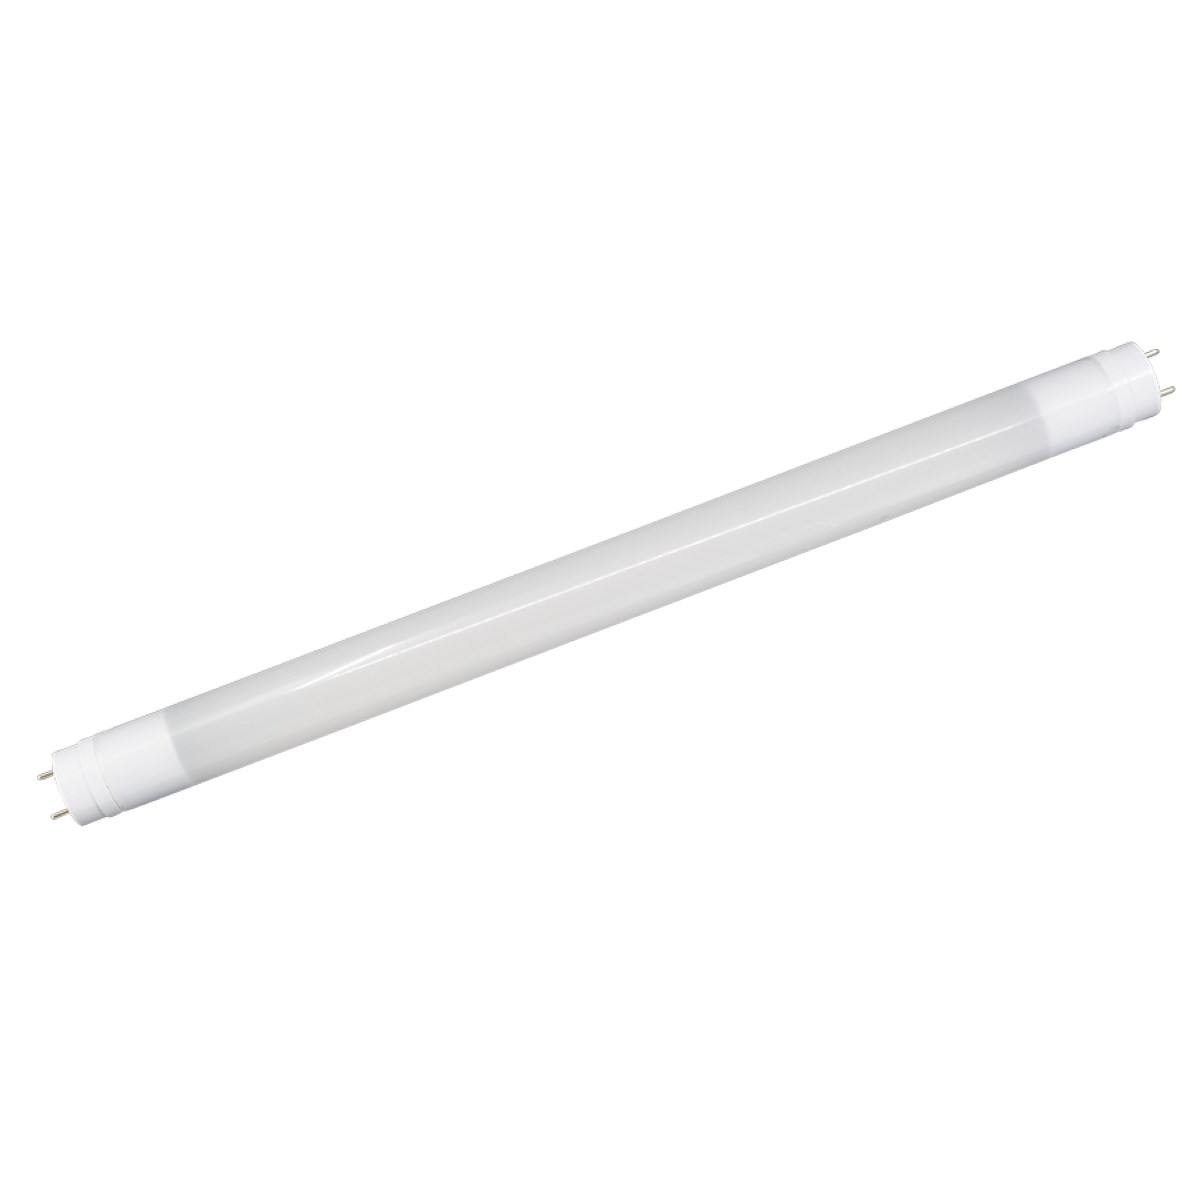 15 Best 24 Inch Led Replacement For Fluorescent Tubes For 2023 1693744577 